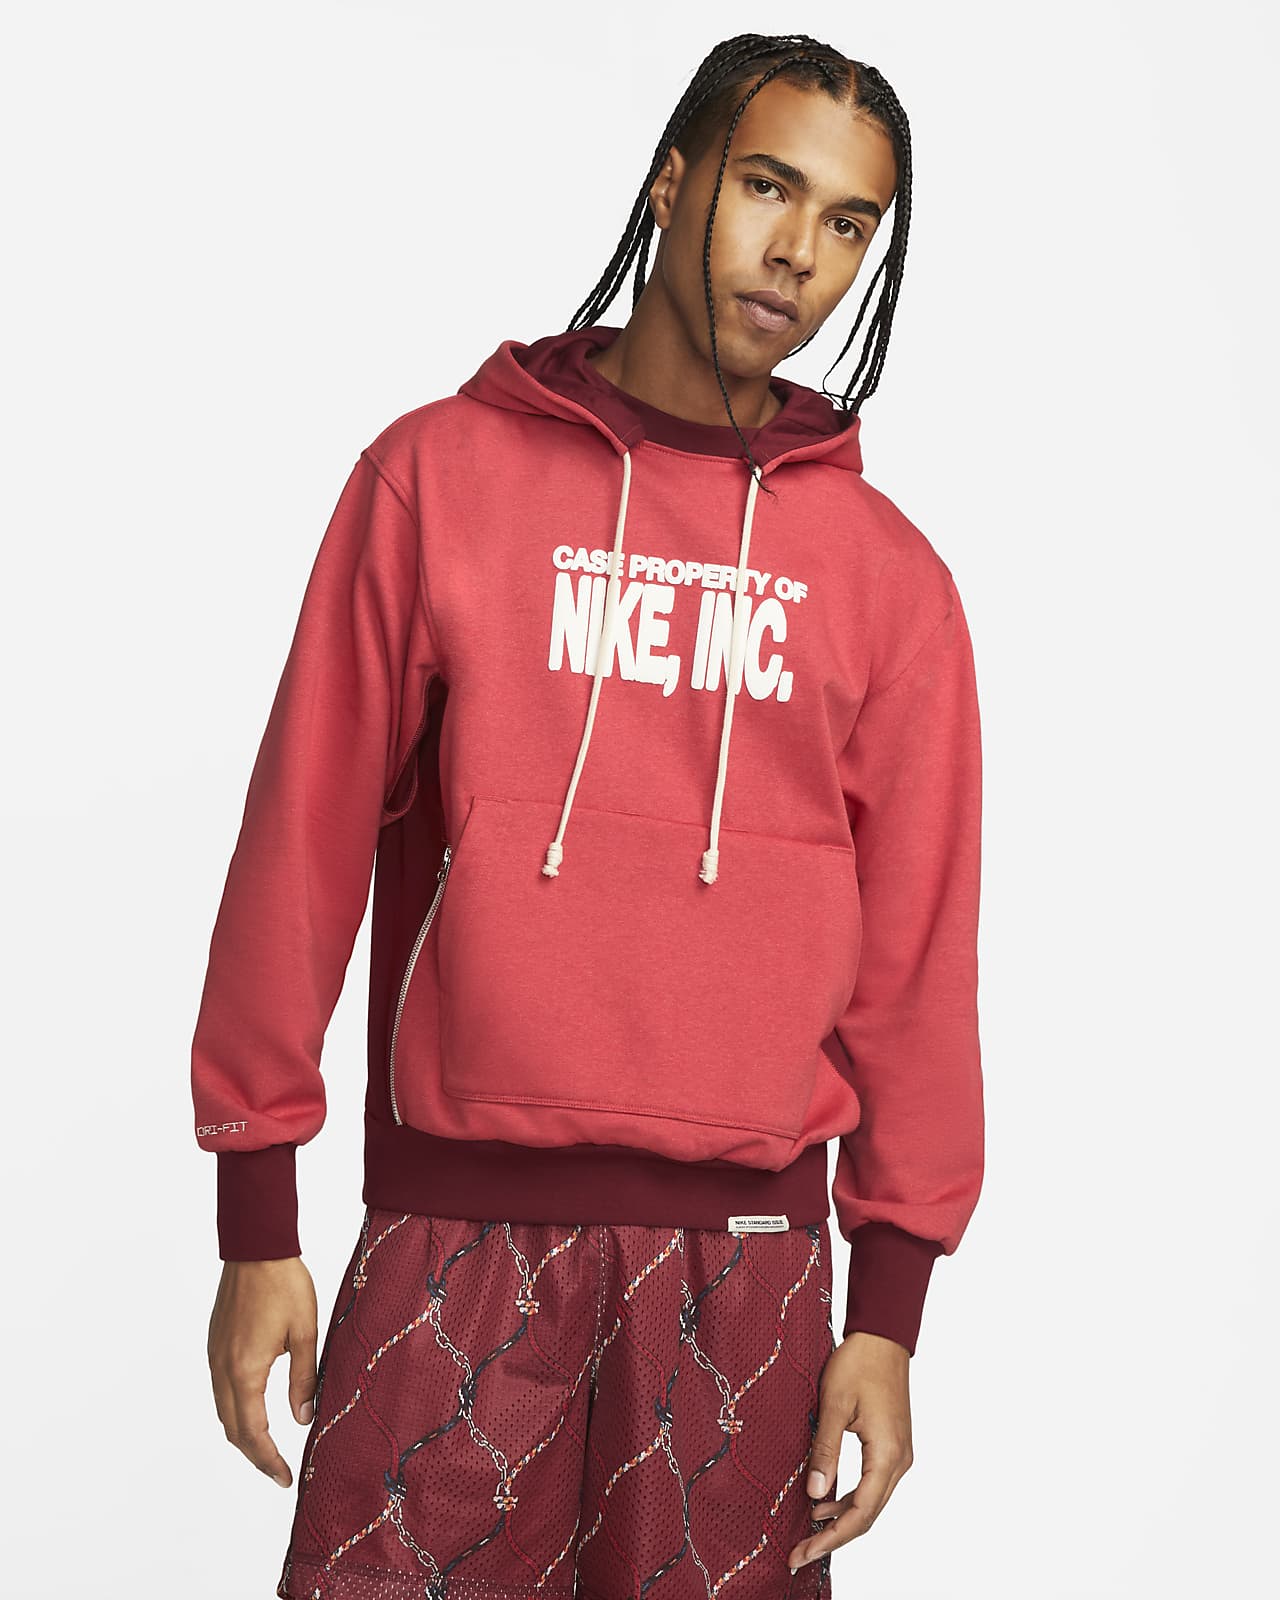 Nike Dri-FIT Standard Issue Men's Pullover Basketball Hoodie